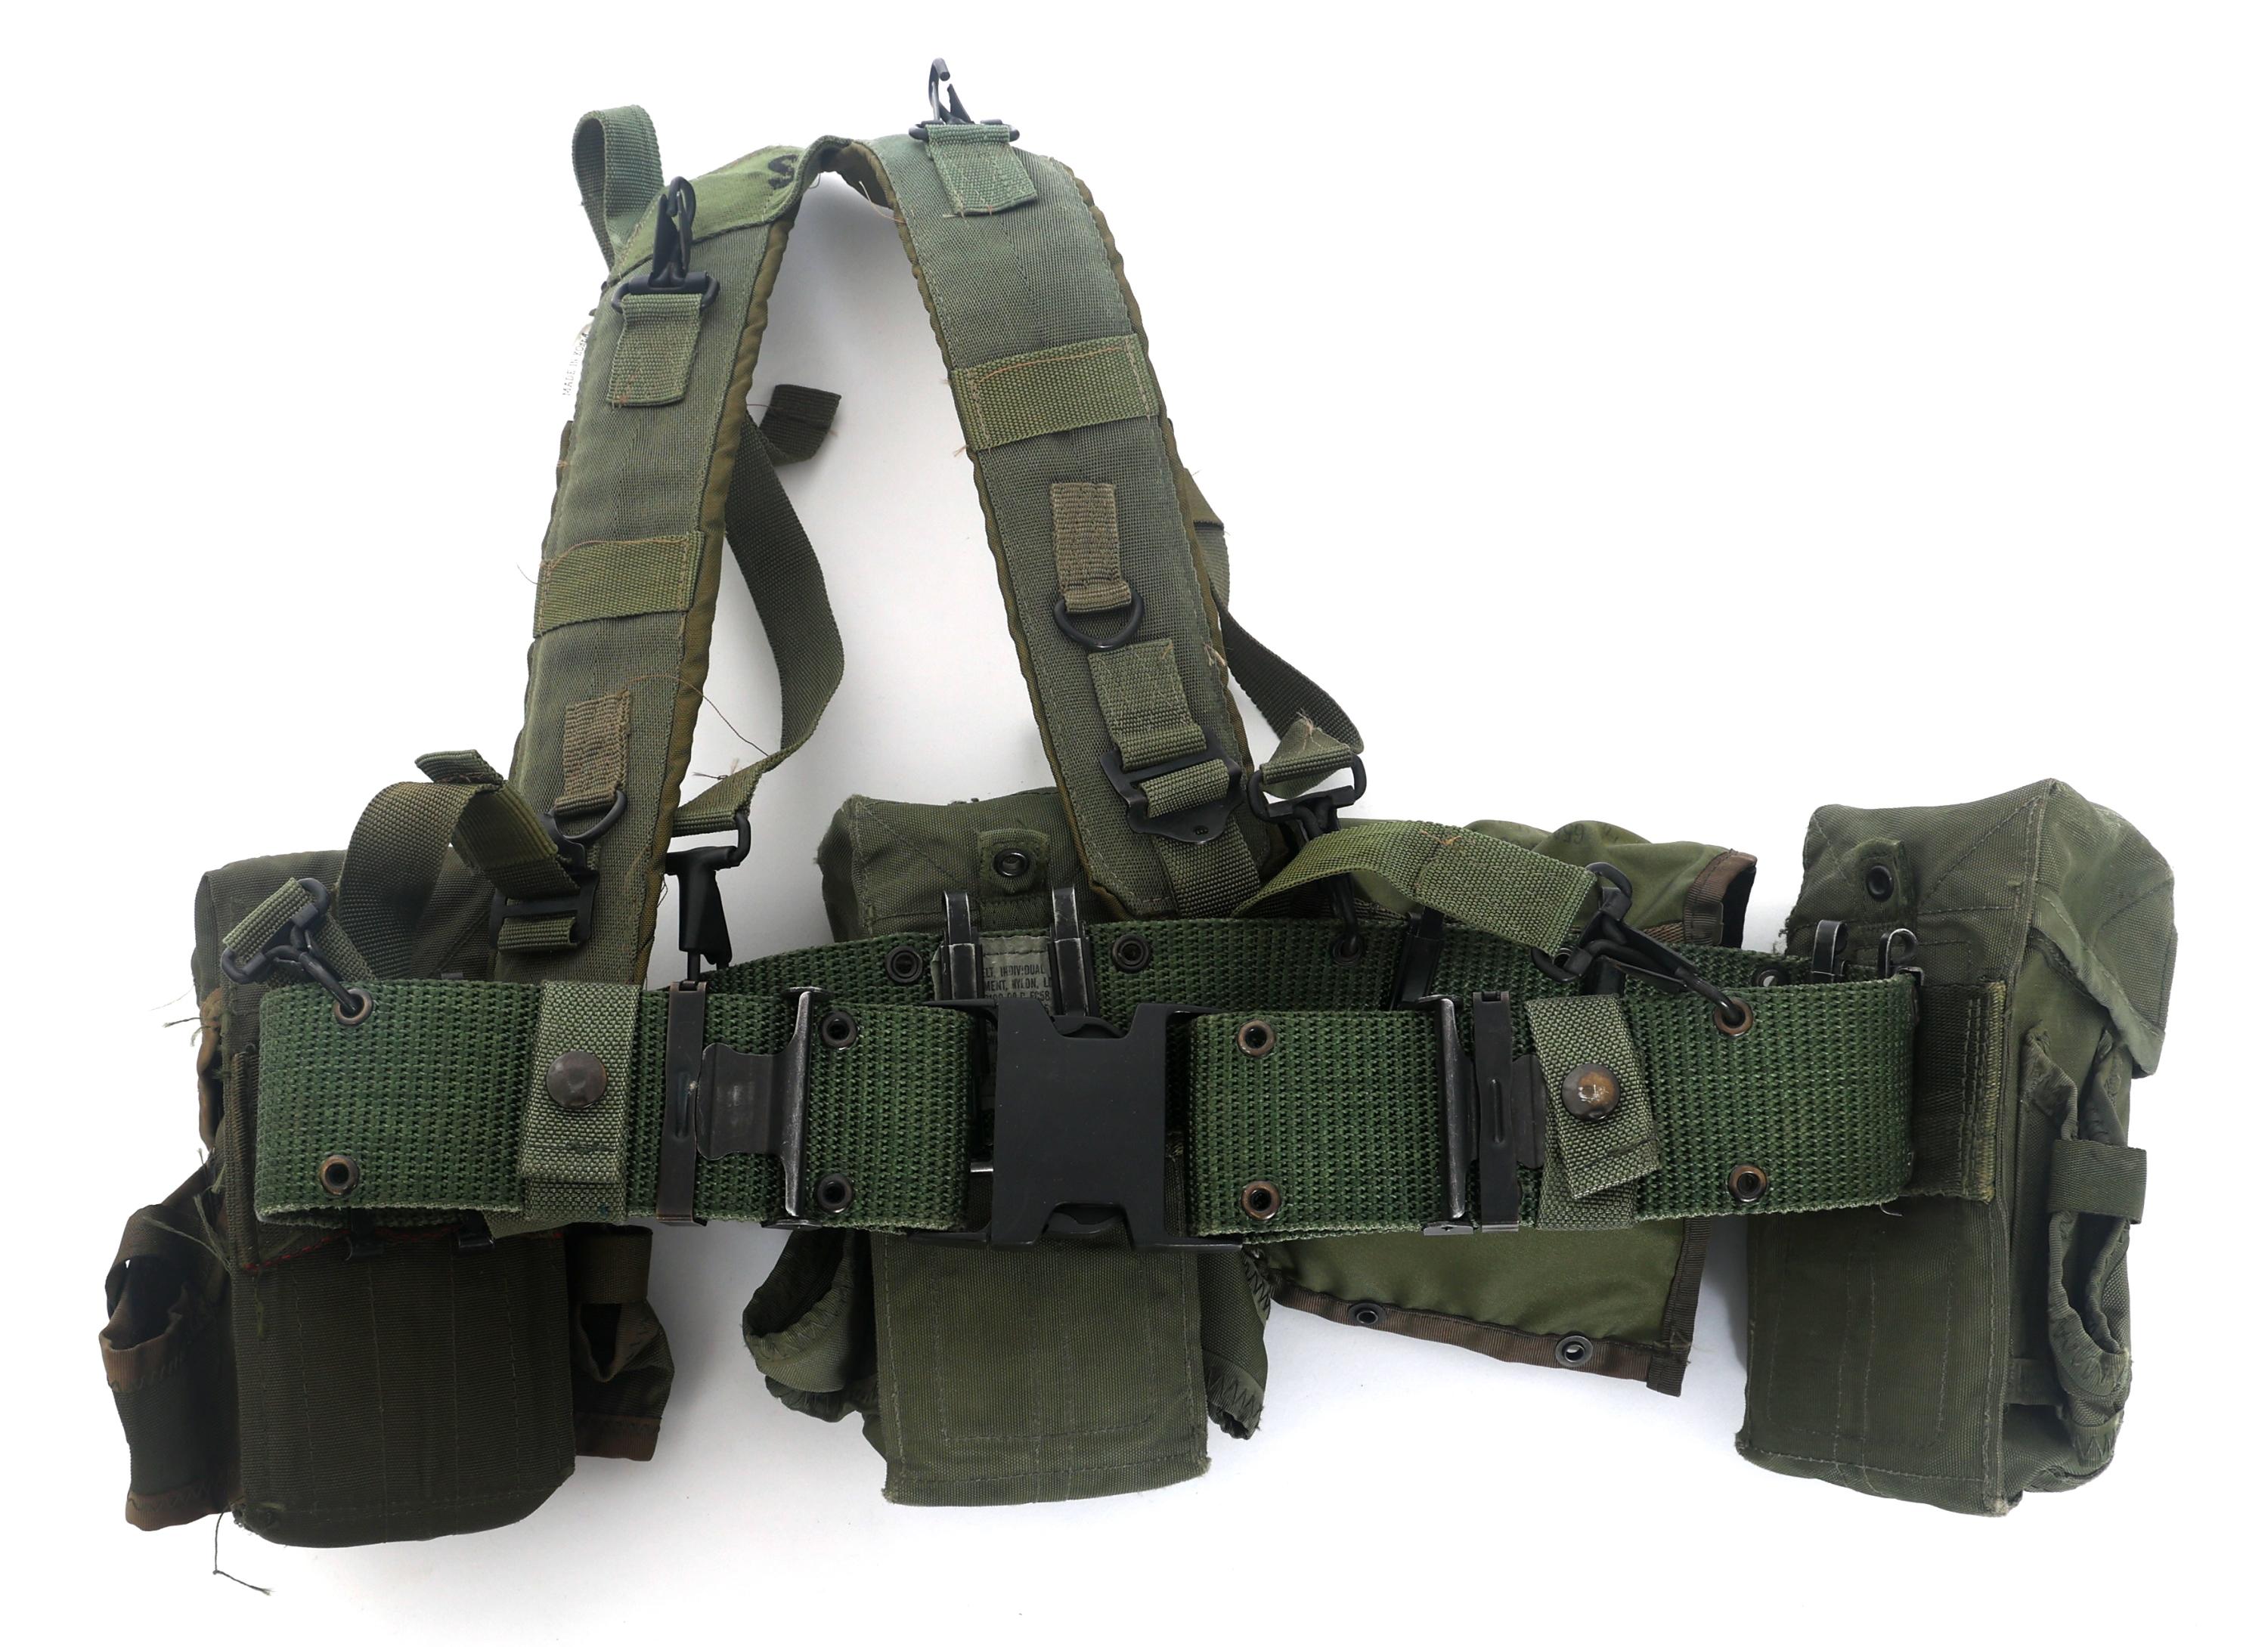 US M5 VEST PACK WITH RIFLE MAGAZINES & MED KIT